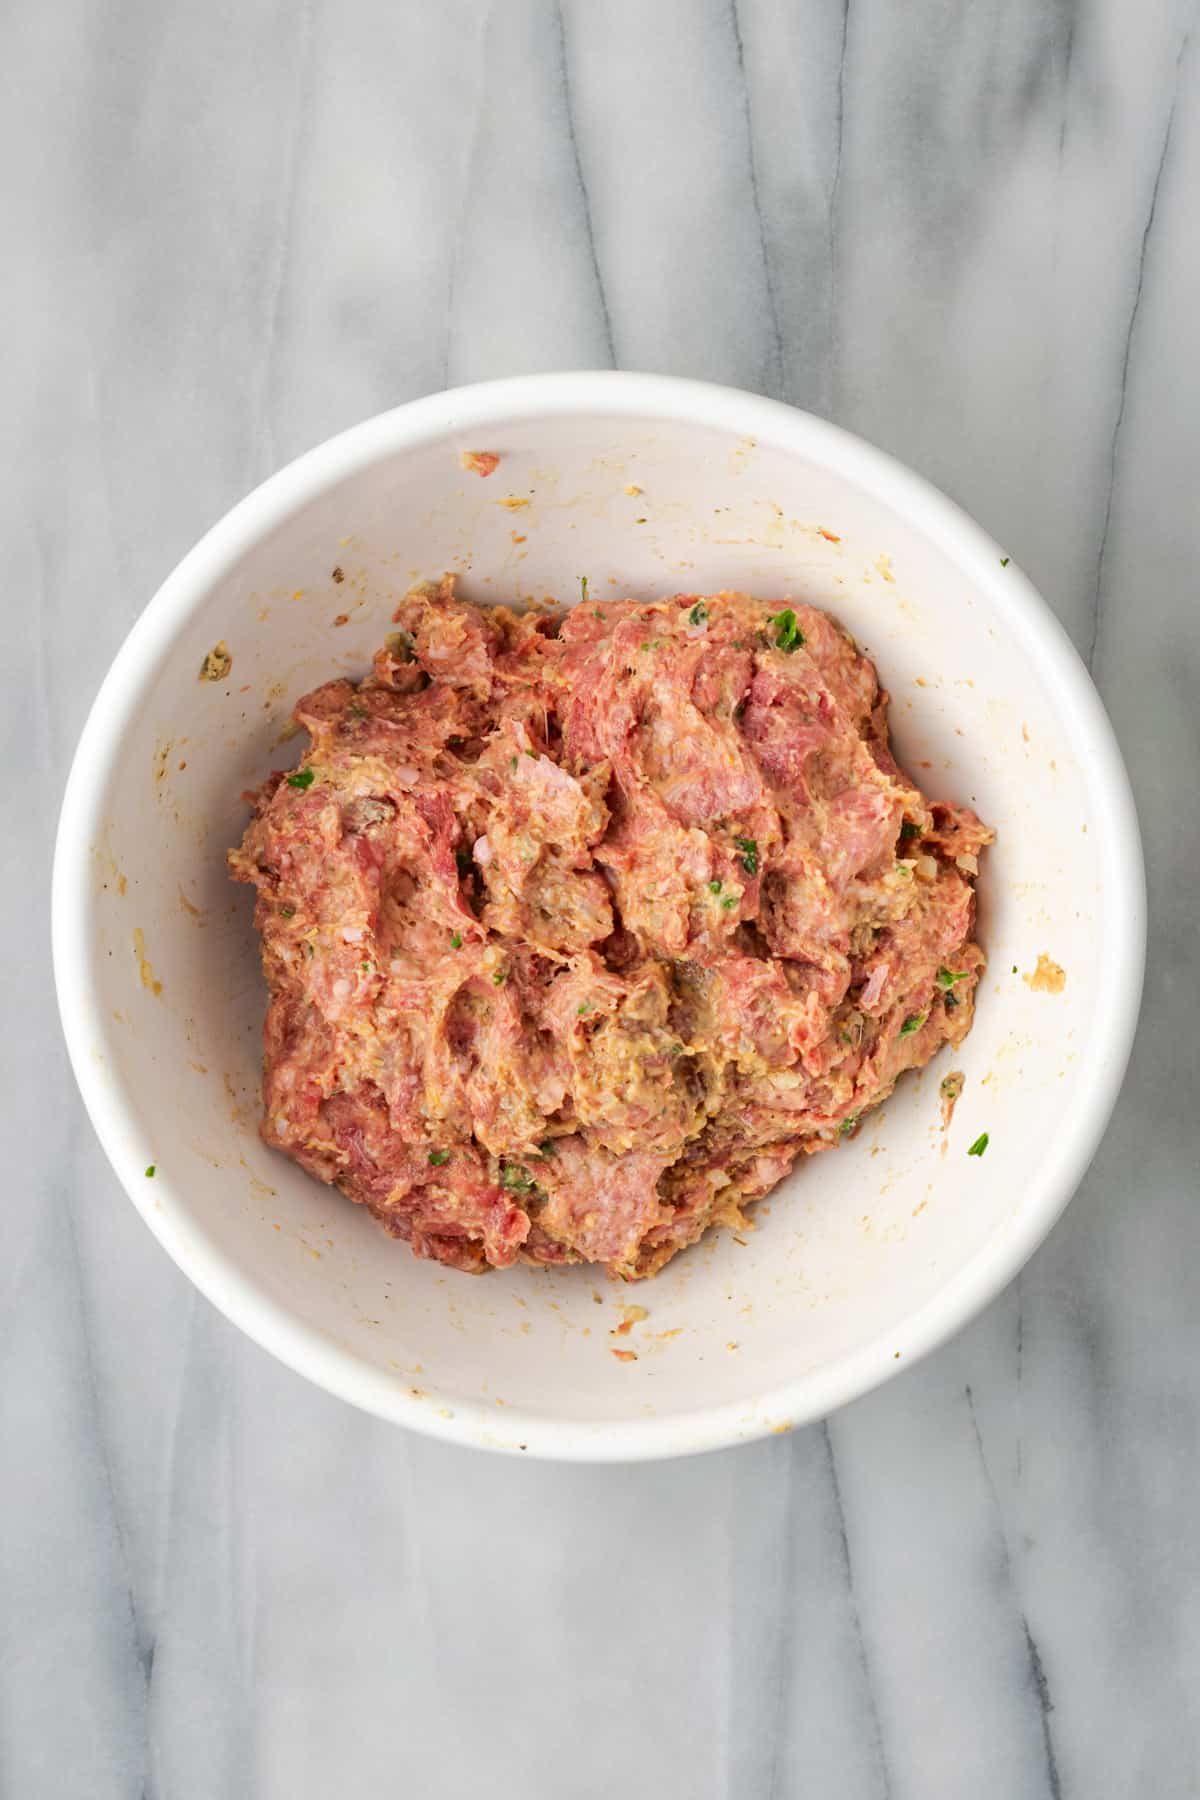 Gluten free meatball mixture combined in a large bowl.